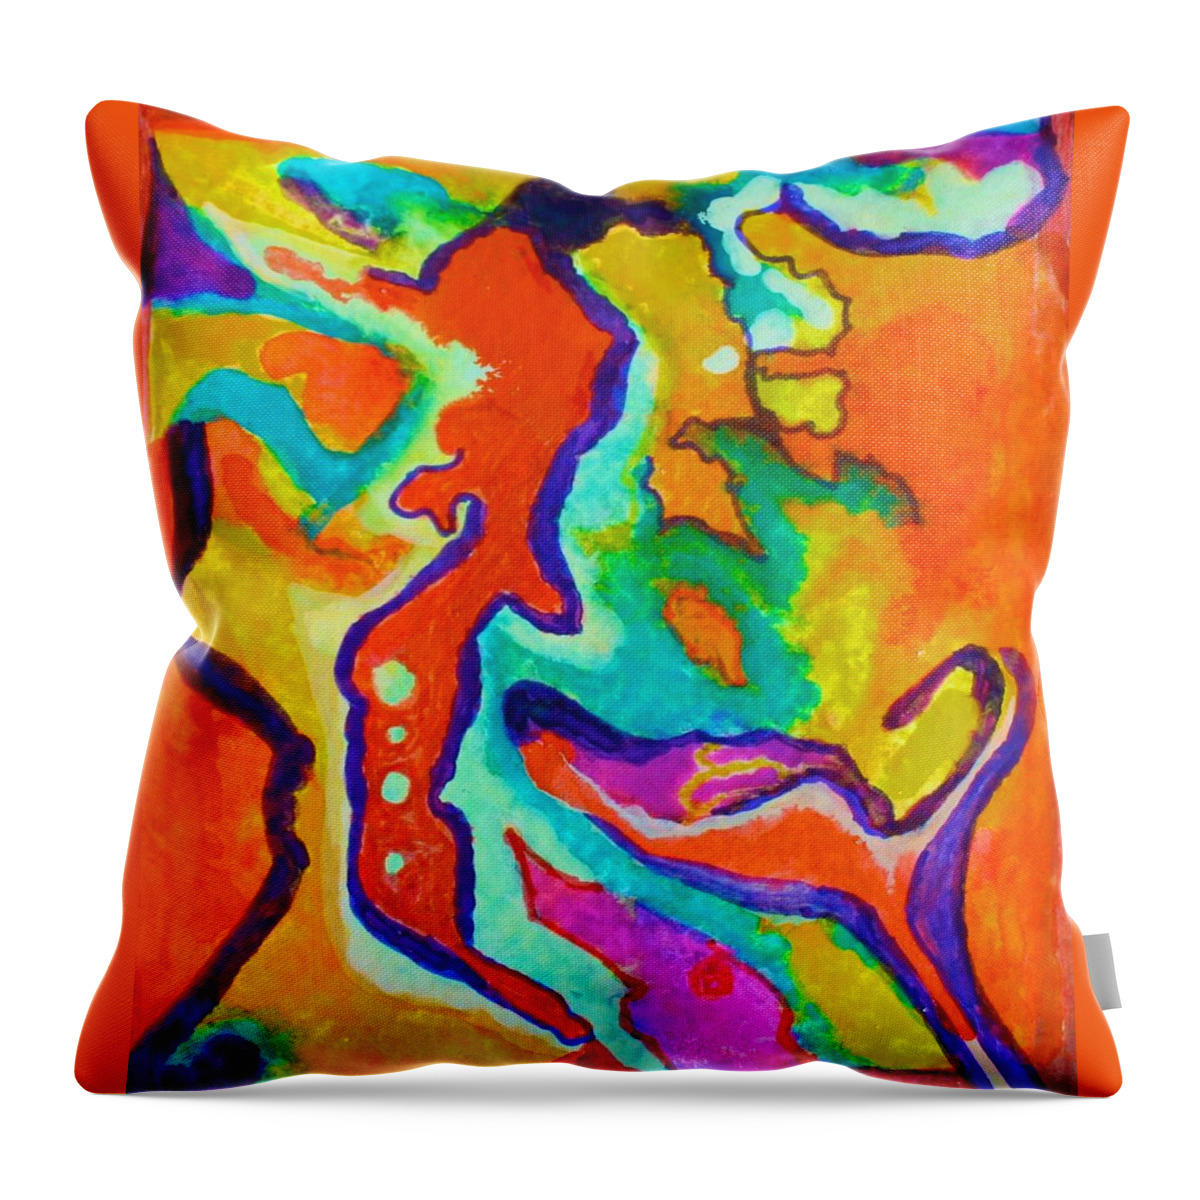  Throw Pillow featuring the painting Stimulated by Polly Castor